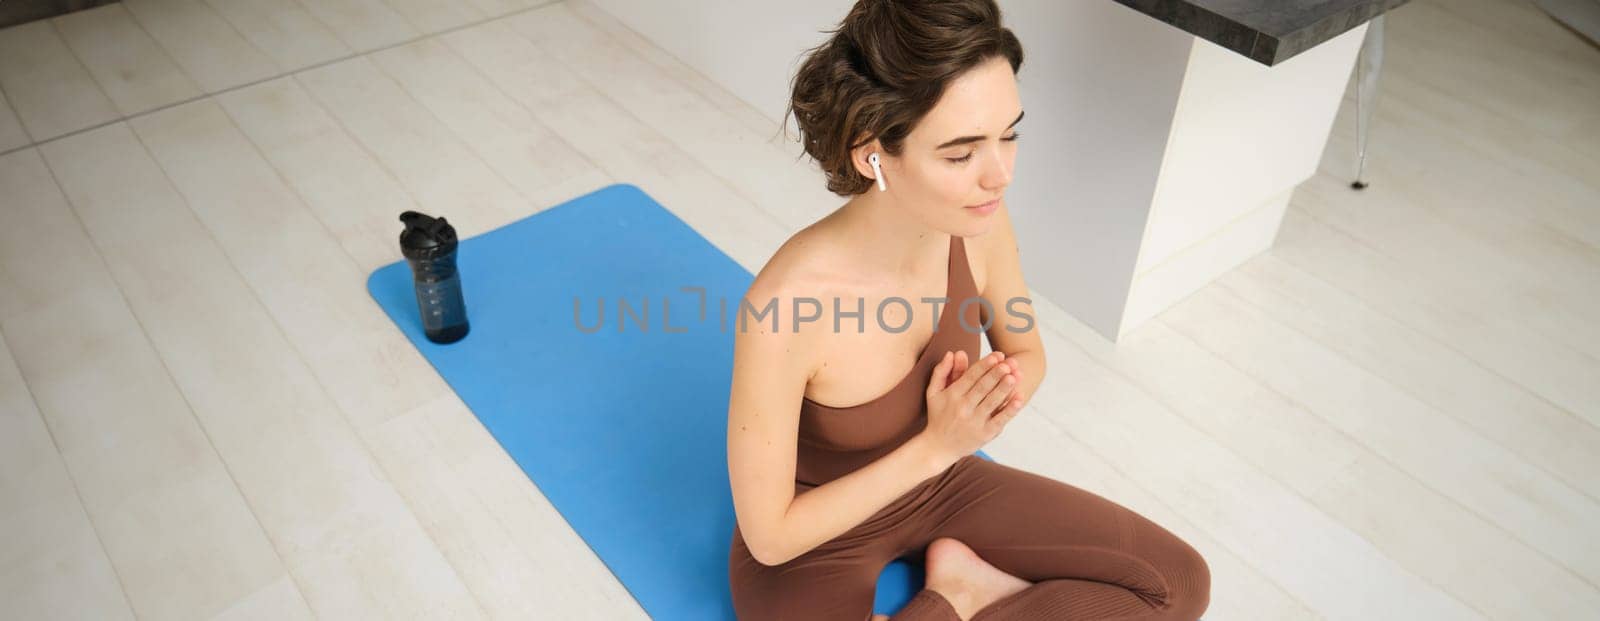 Mindfulness and meditation. Young spiritual woman, does yoga, sits in meditation pose in headphones, with workout application, training guide in her smartphone.